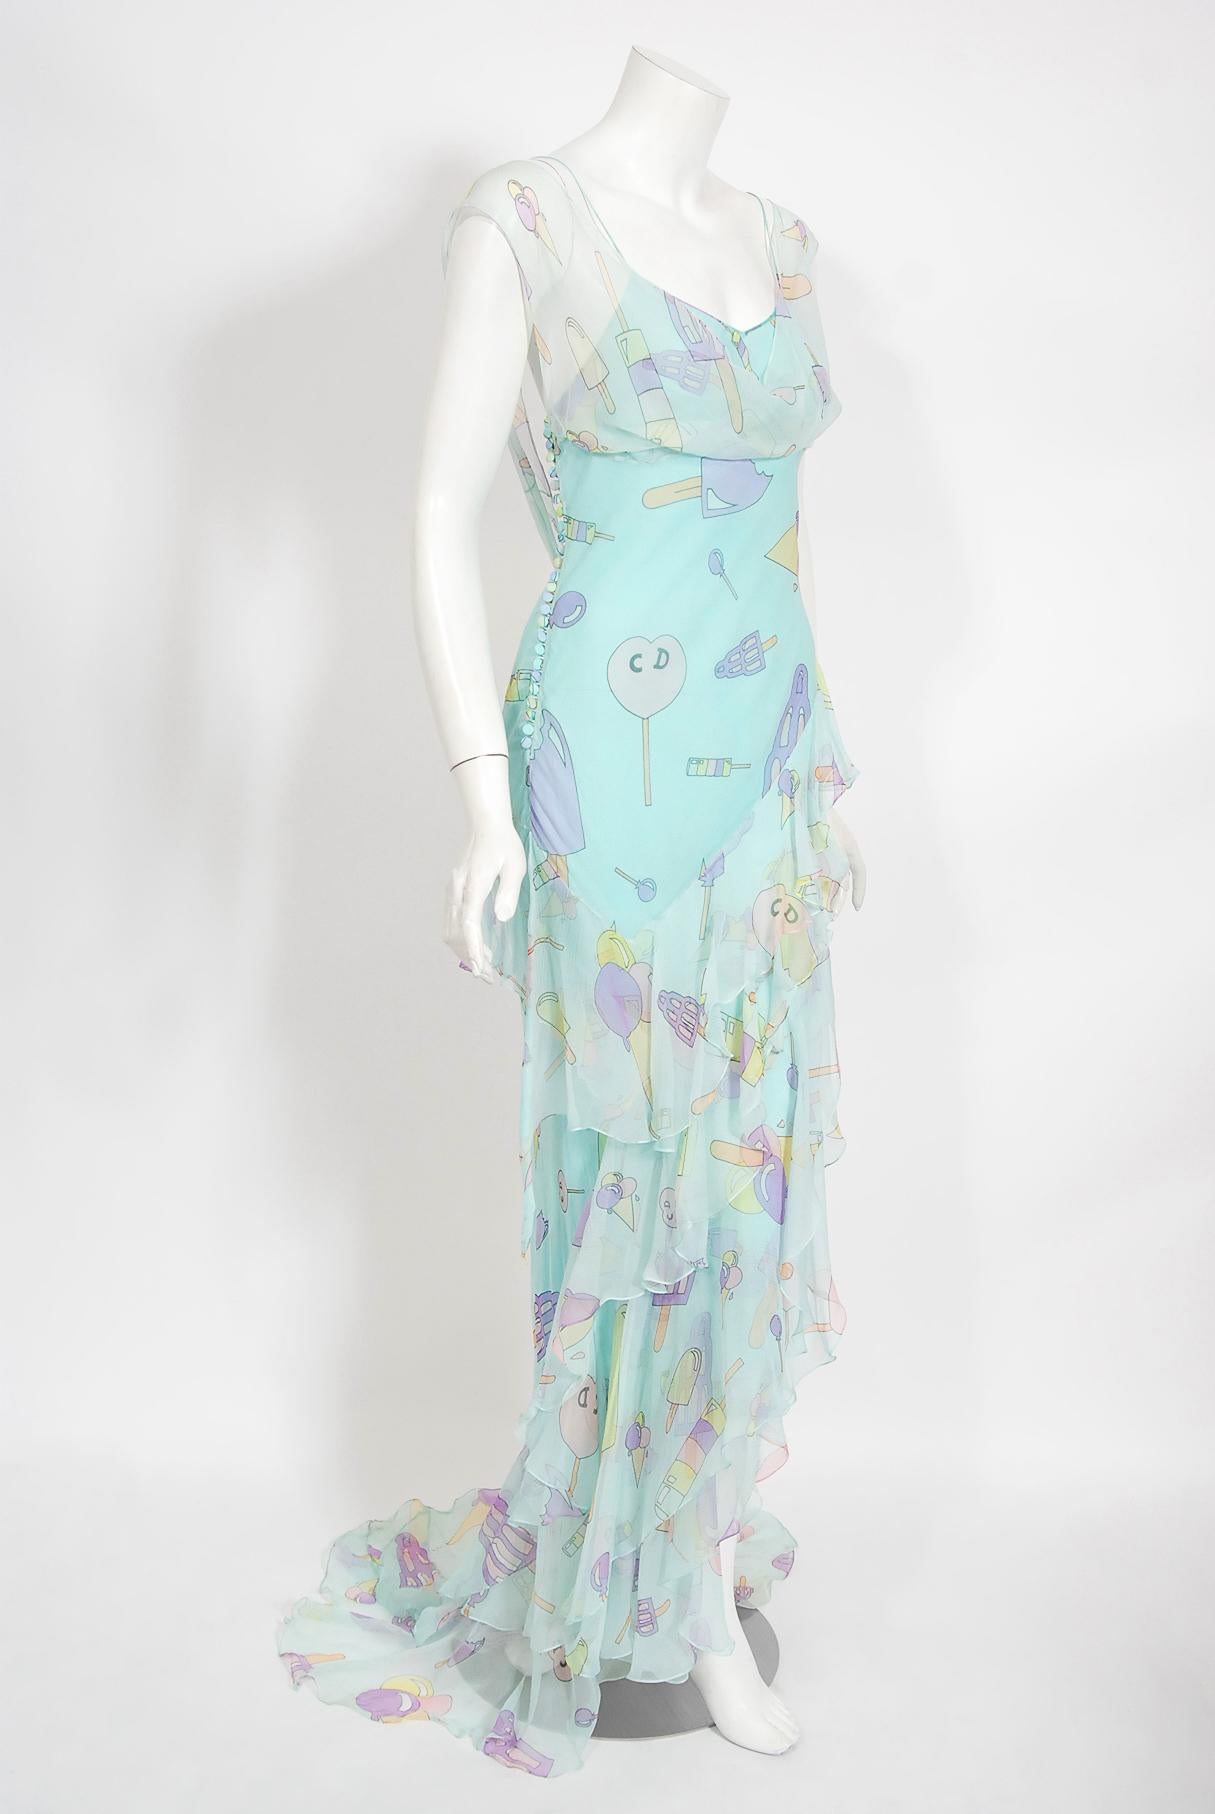 Women's Vintage 2002 Christian Dior by Galliano Novelty Candy Print Silk Bias-Cut Gown